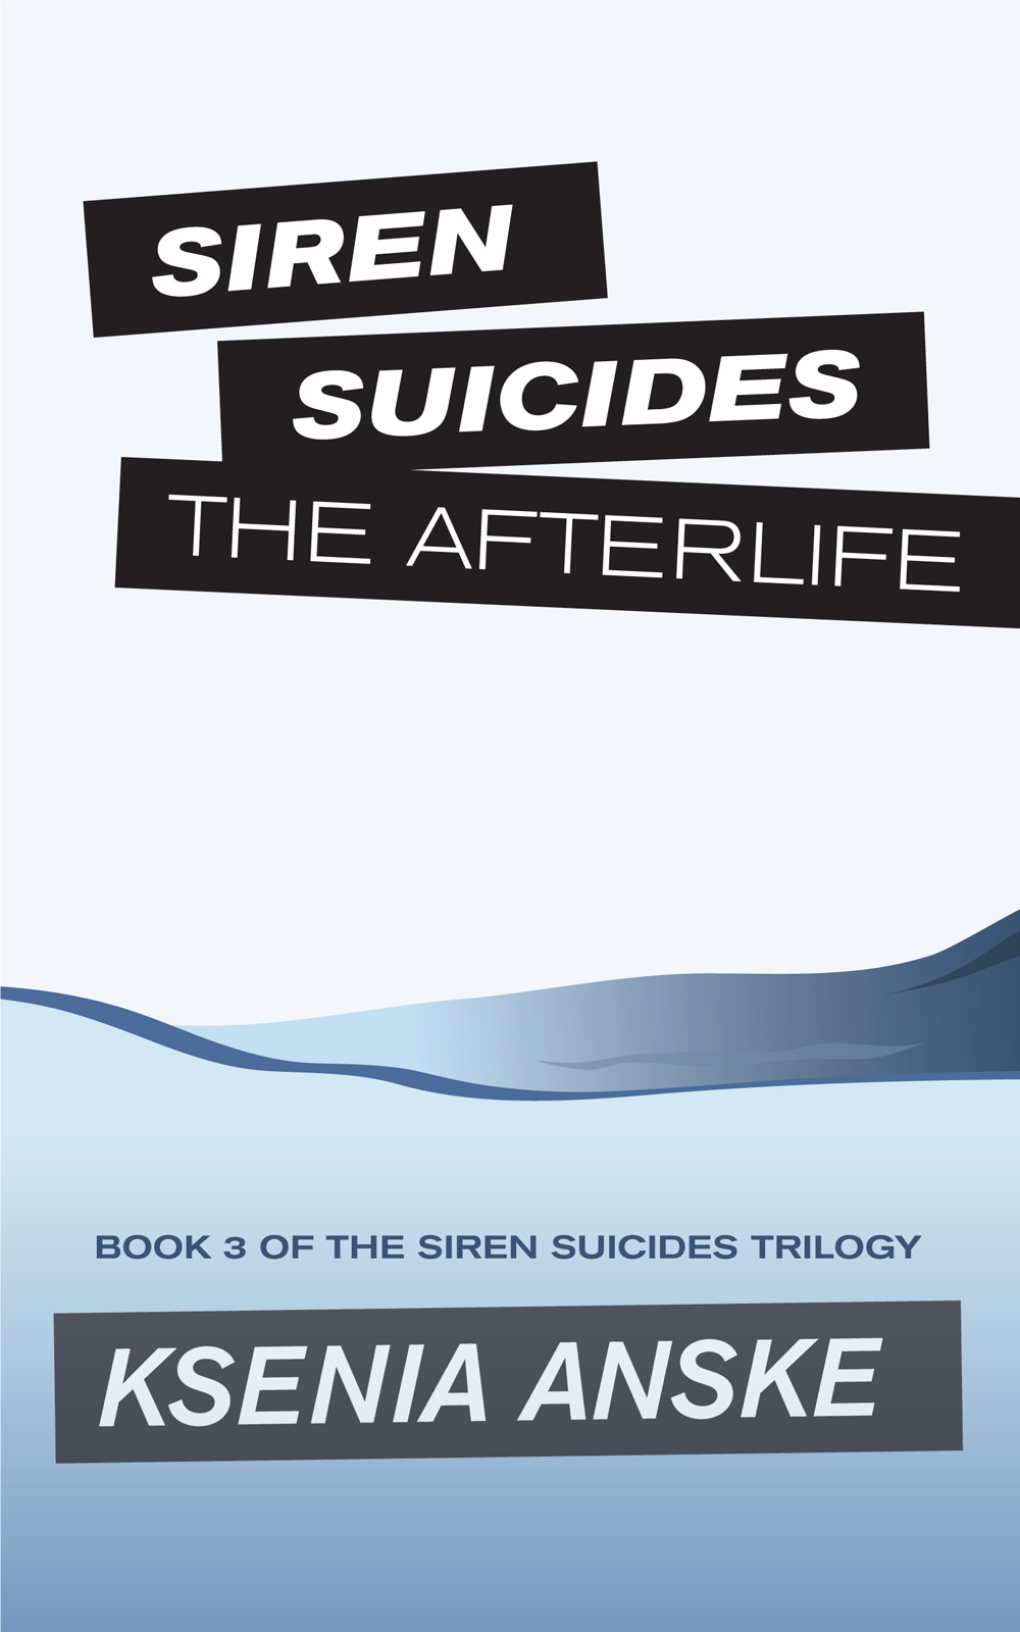 The Afterlife (Siren Suicides, Book 3)